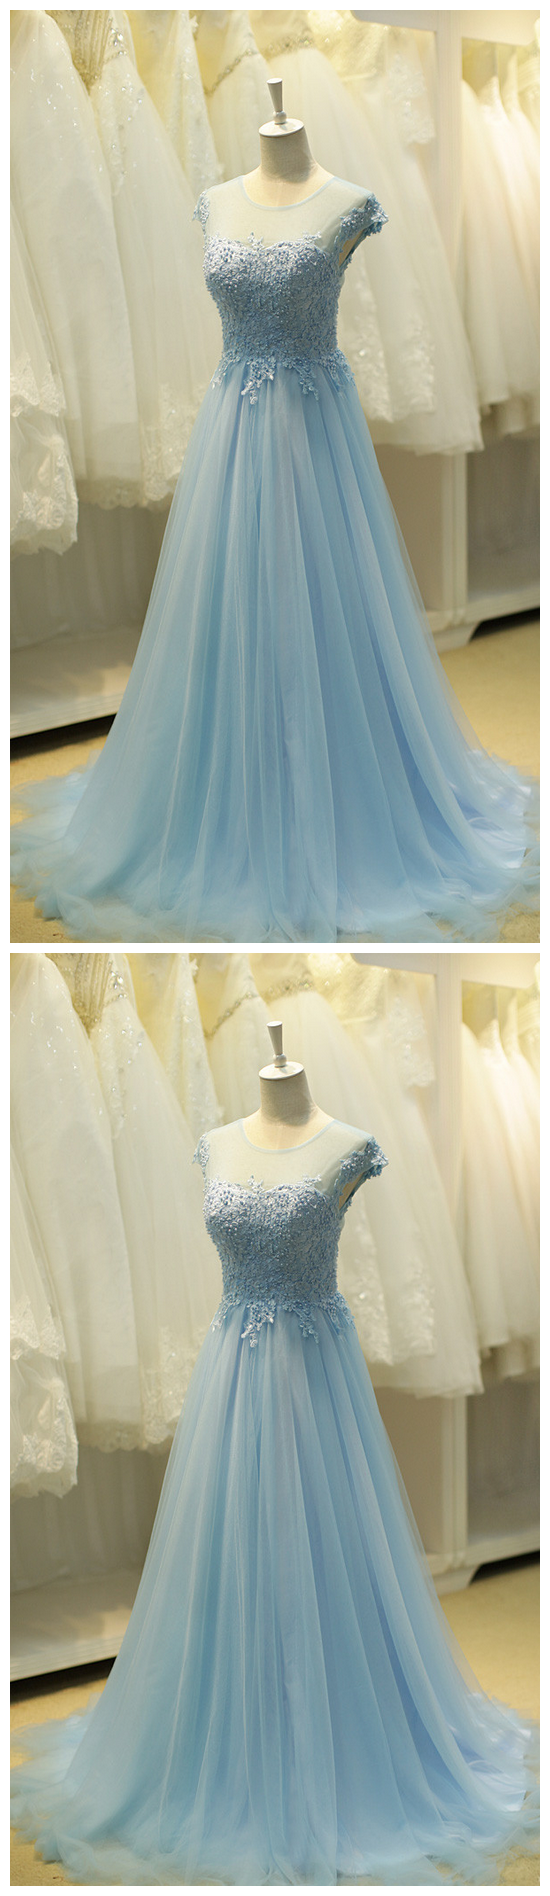 Sexy A Line Light Blue Lace Sccop Neck Long Prom Dress With Appliqued Sweep Train Prom Party Gowns Custom Made Evening Dress